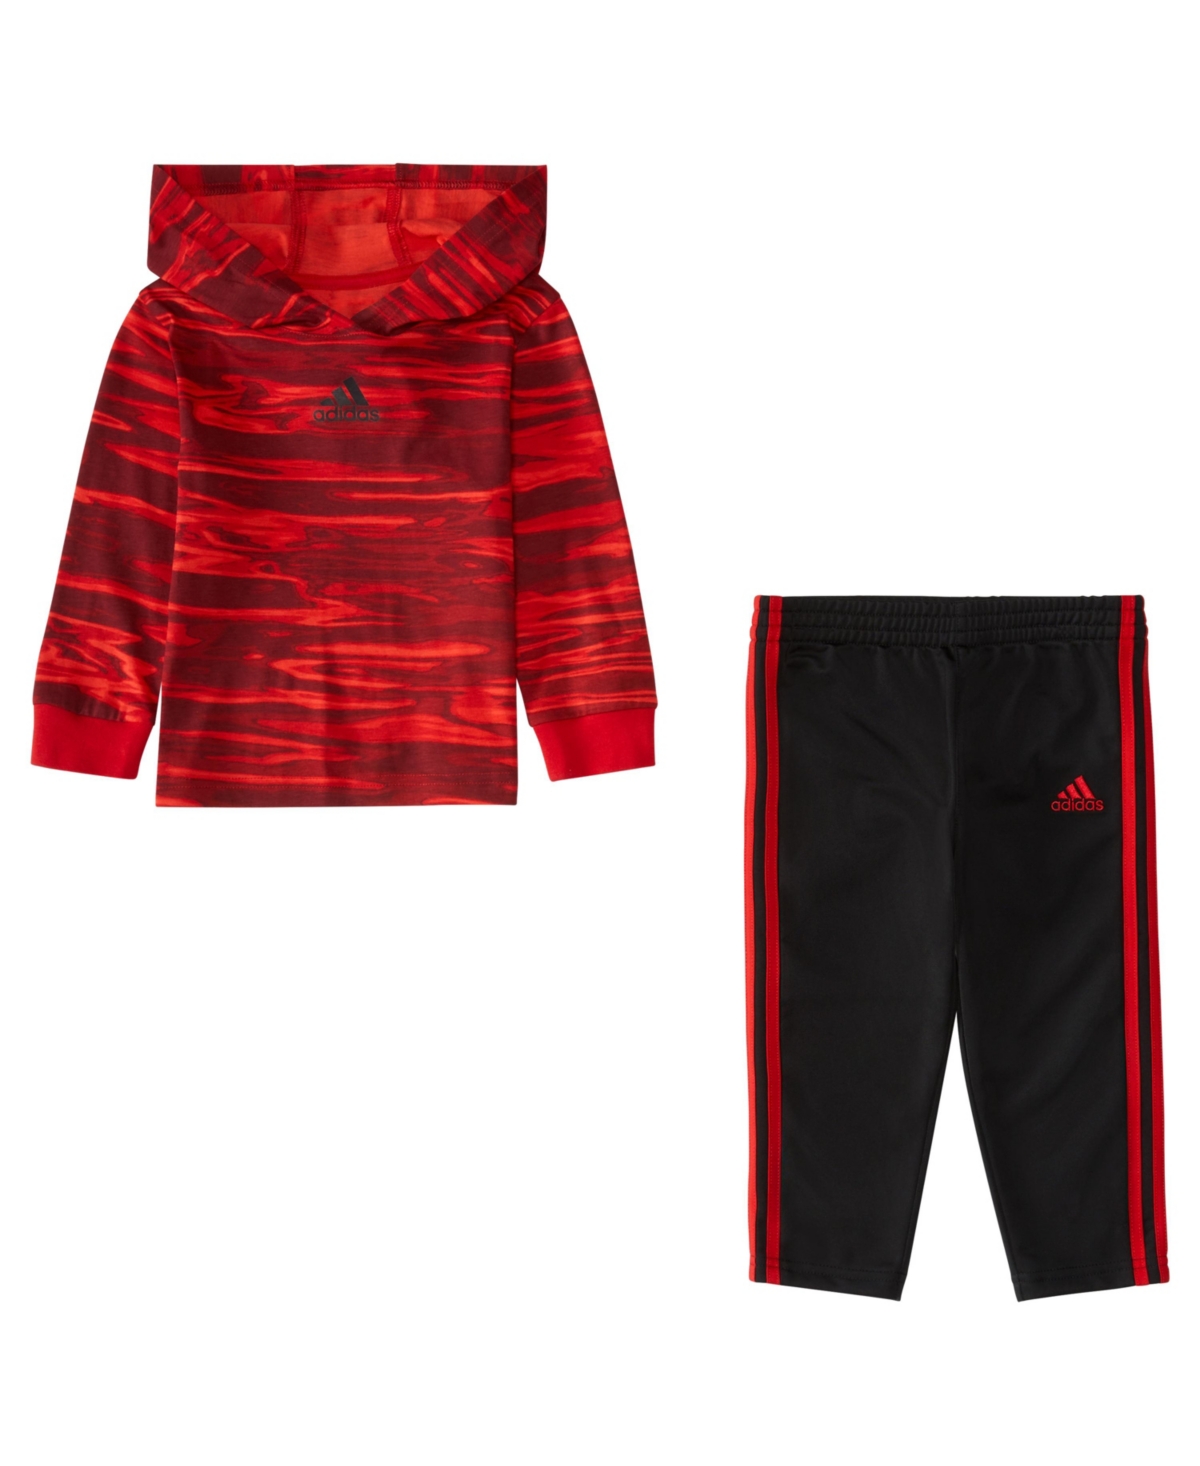 Adidas Originals Baby Boys Long Sleeve Hooded Shirt And Pants, 2 Piece Set In Better Scarlet